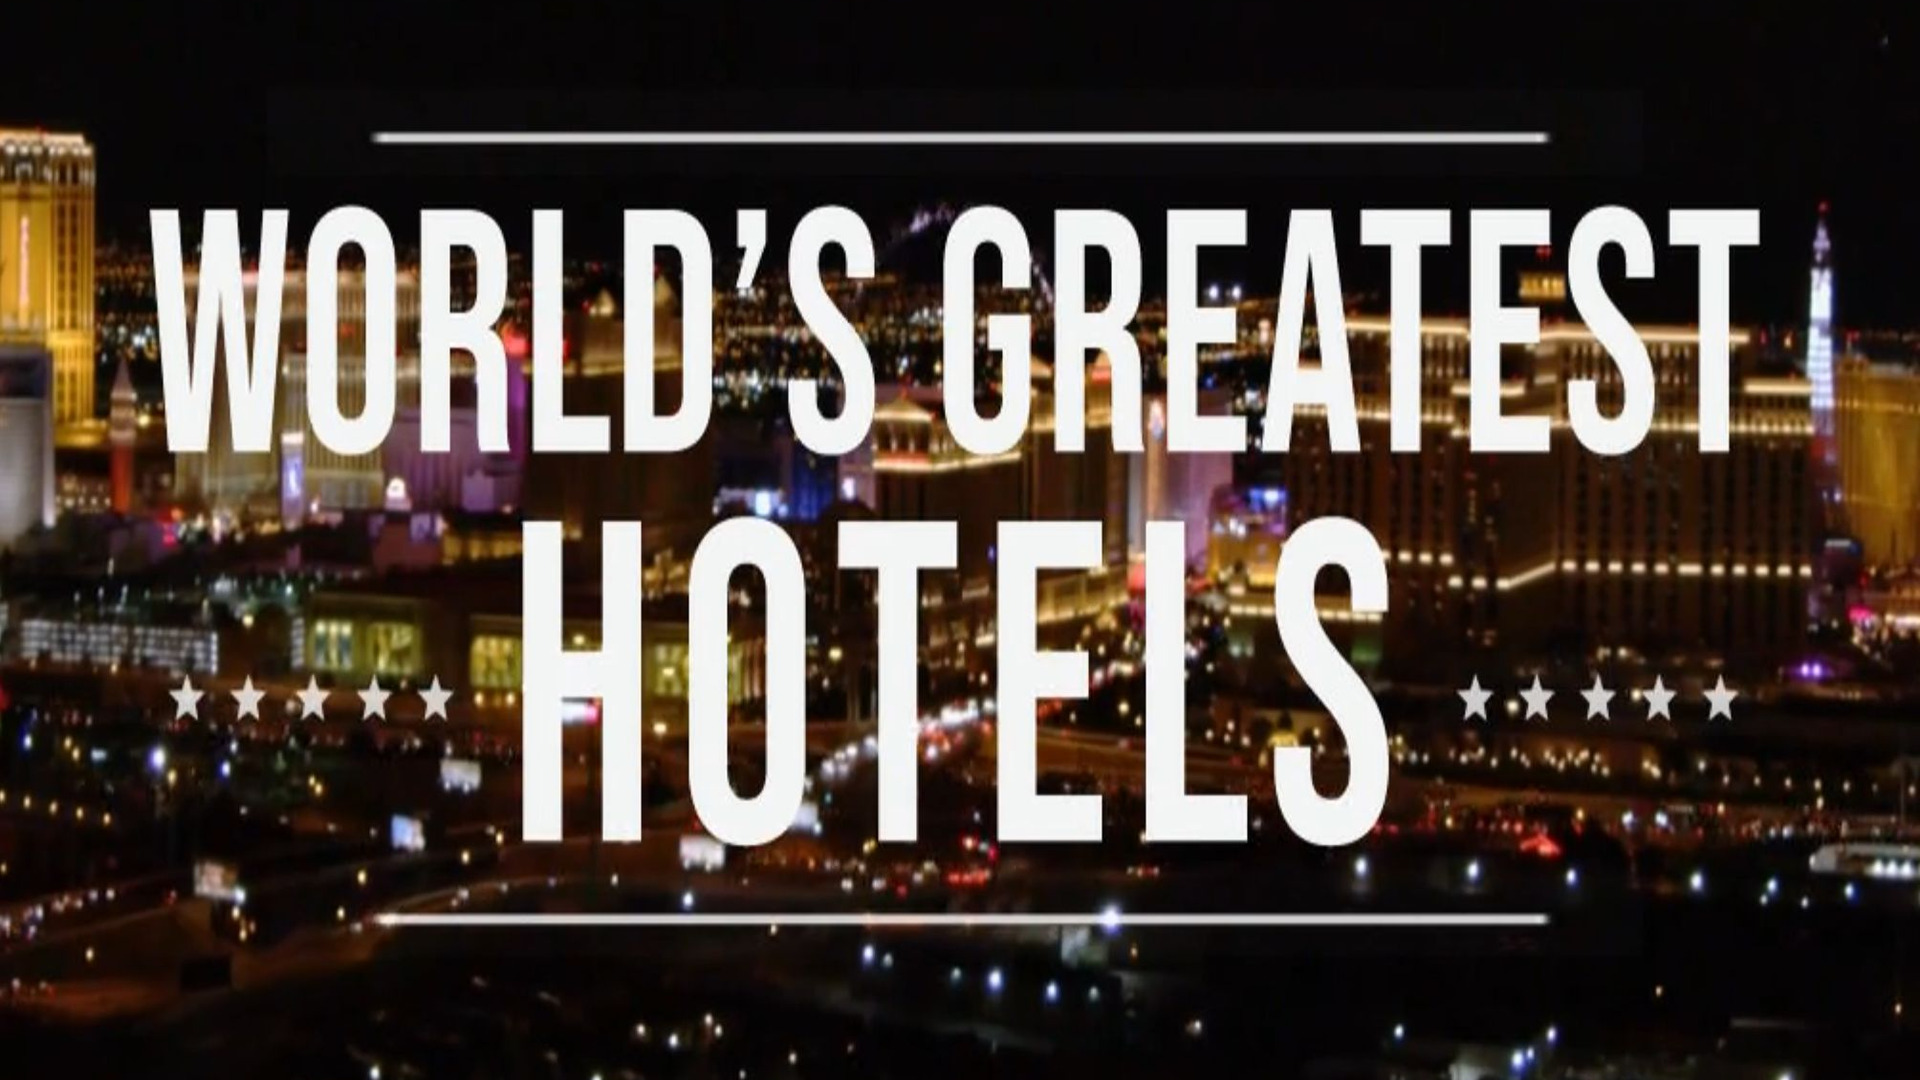 Show Inside the World's Greatest Hotels